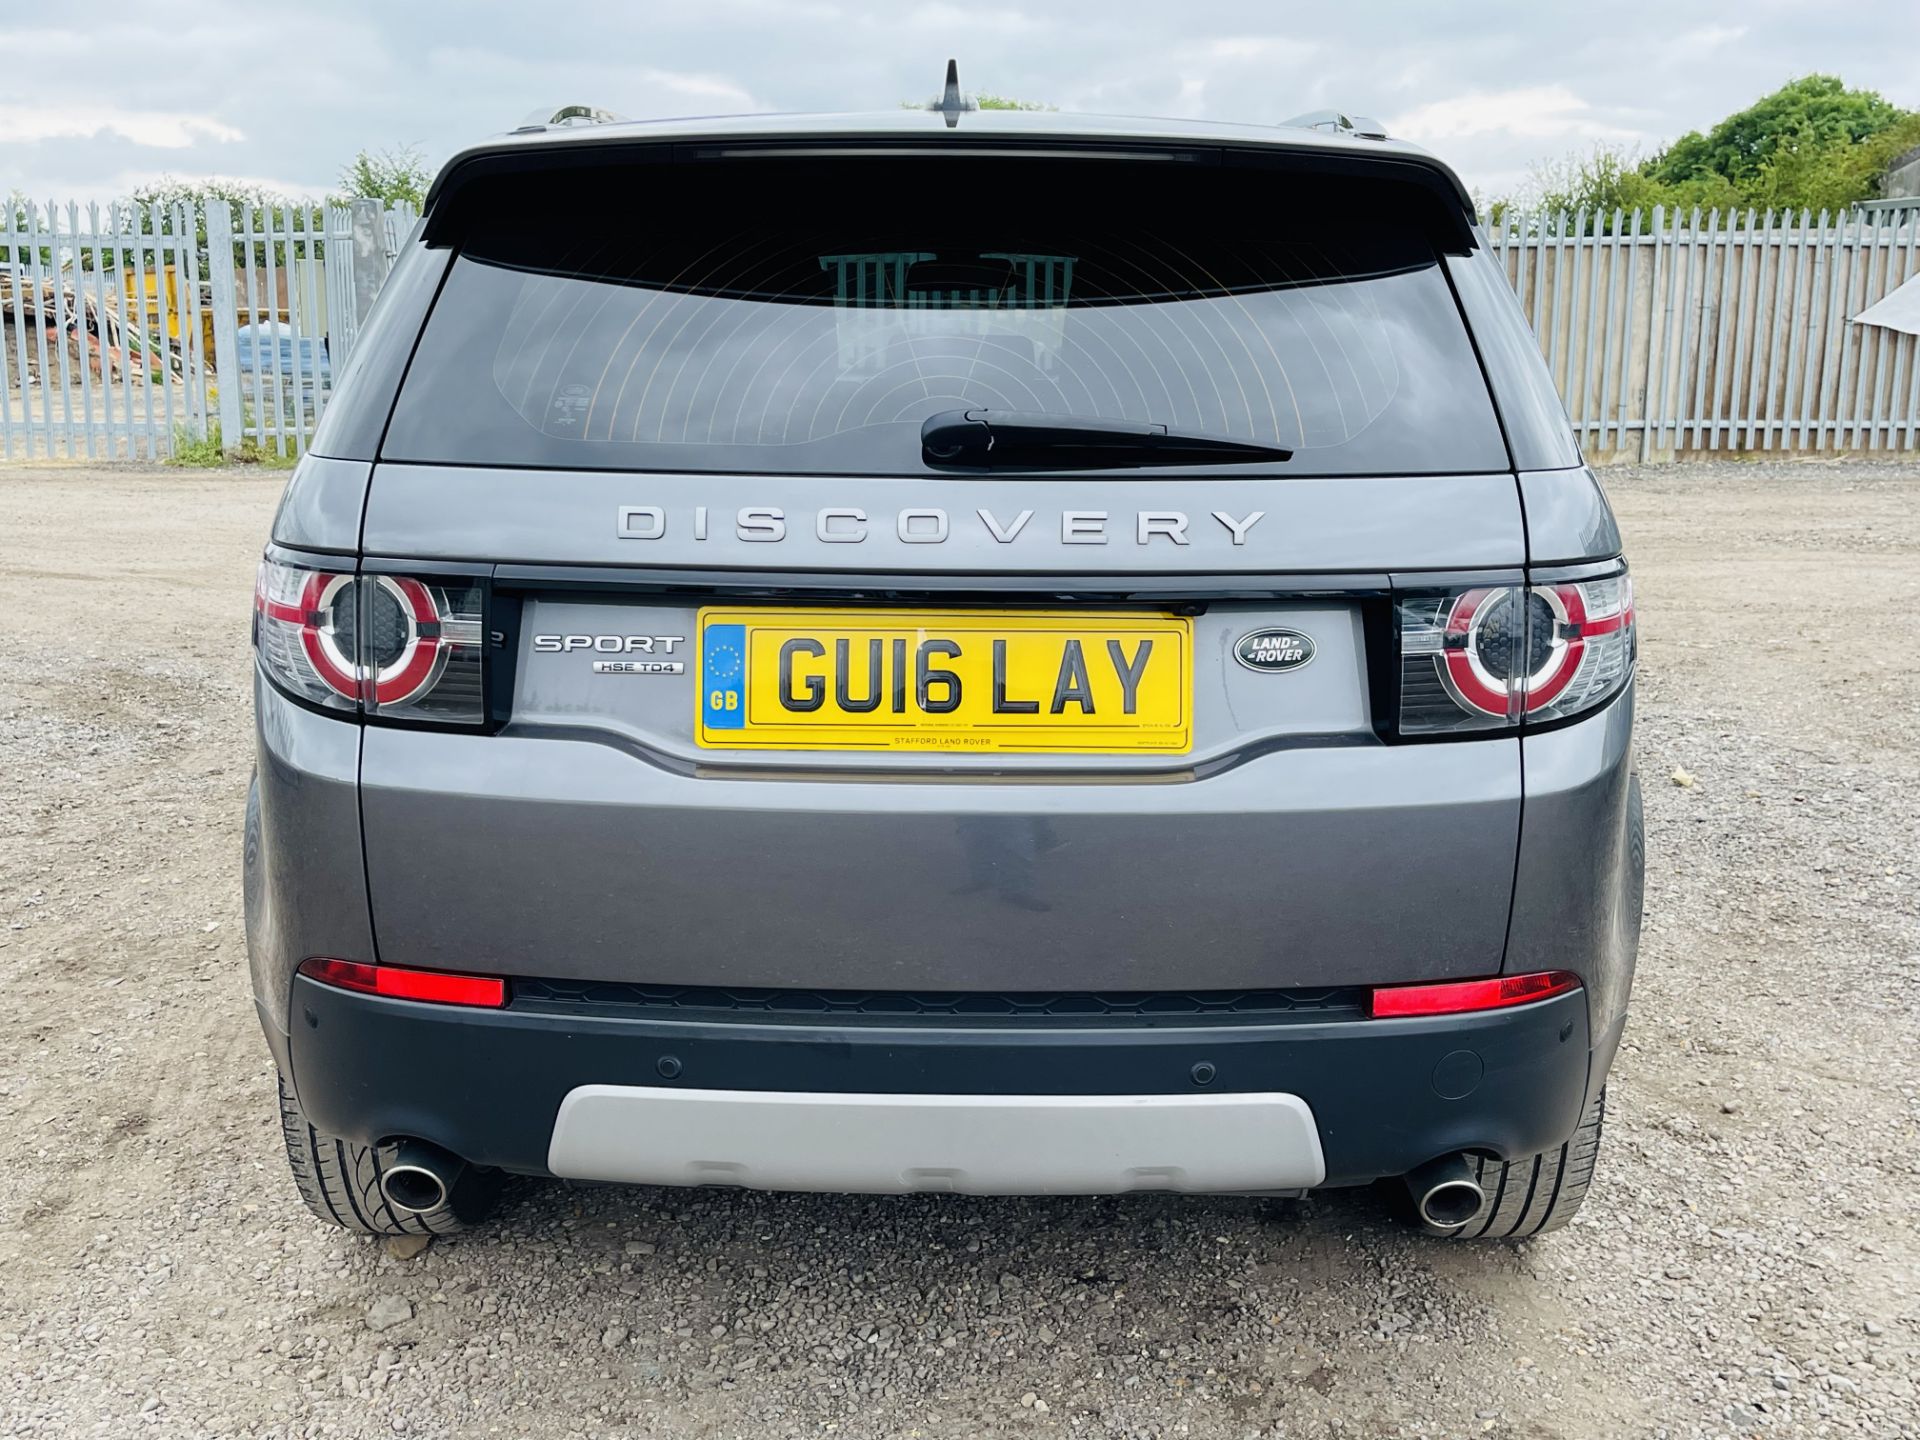 ** ON SALE **Land Rover Discovery sport 2.0 TD4 HSE 2016 '16 Reg' 7 seats - Sat Nav - Euro 6 - - Image 17 of 35